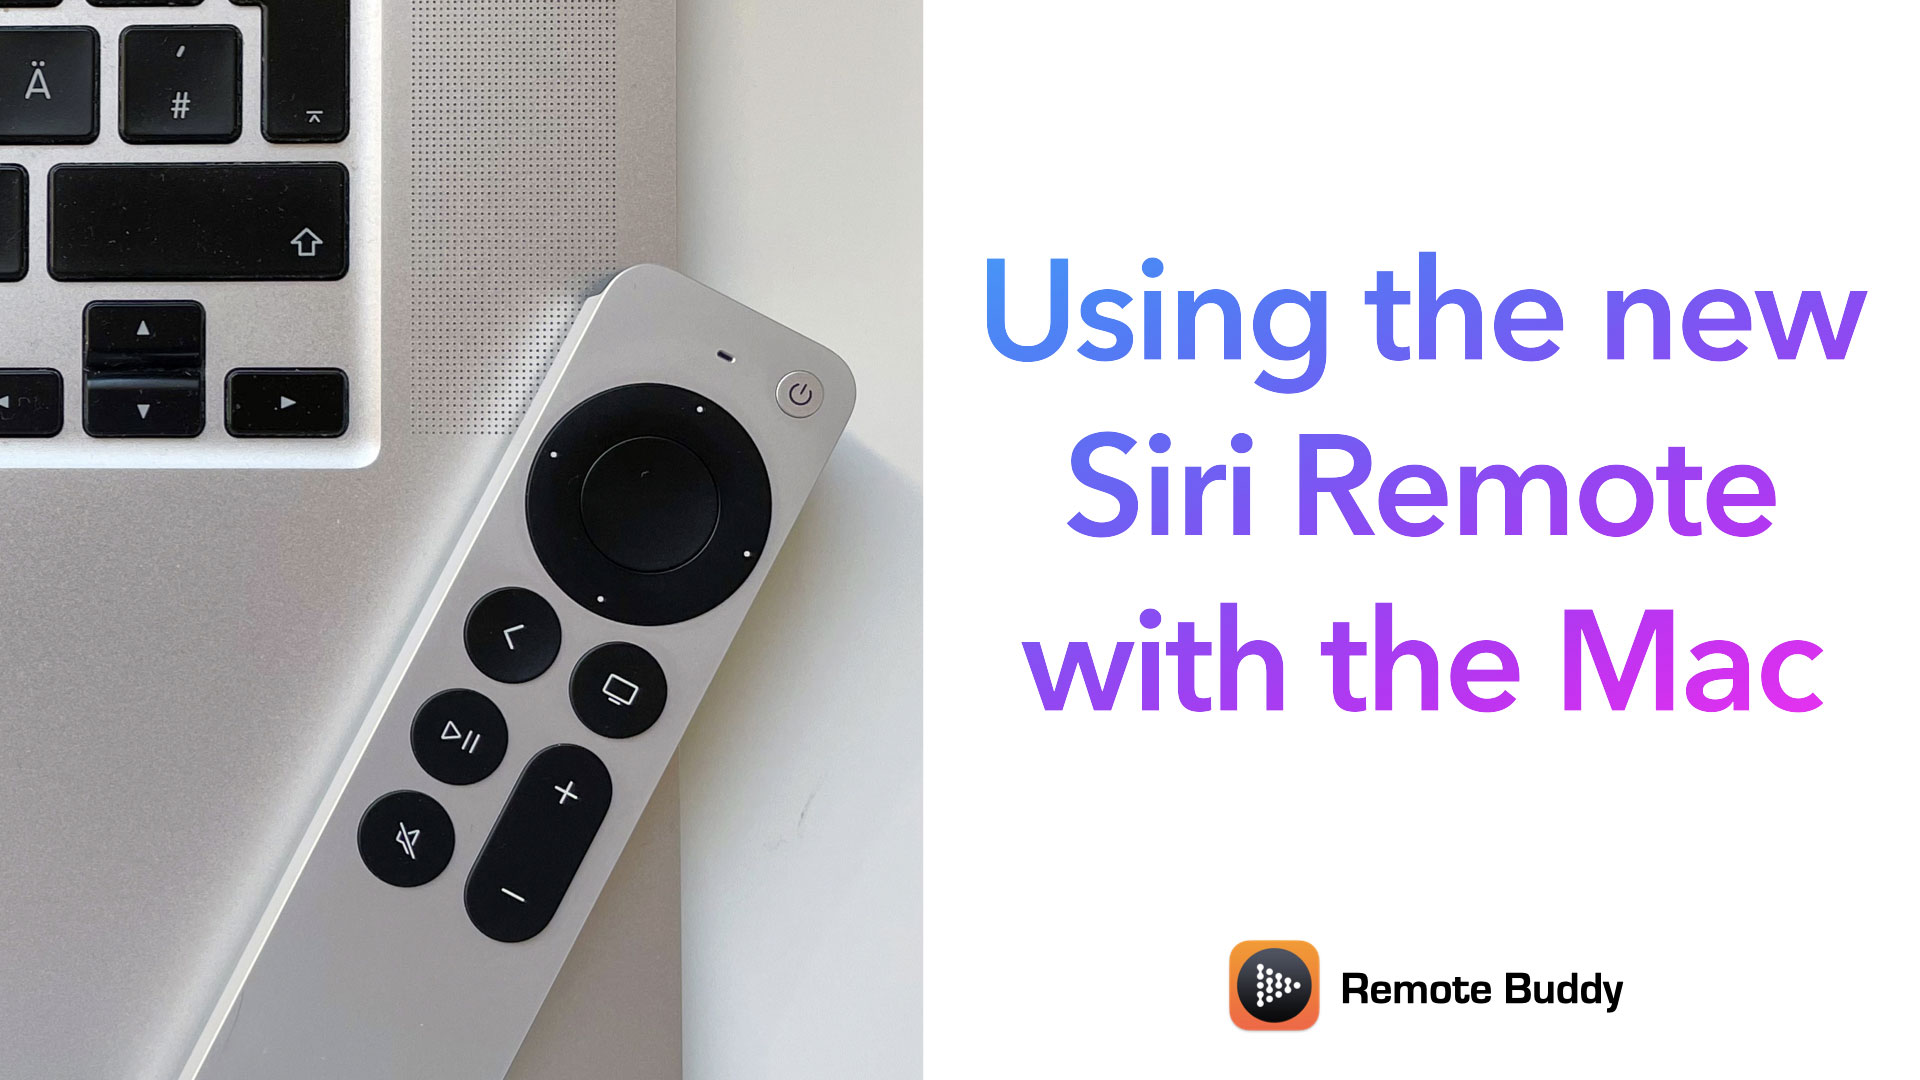 ipad as remote control for mac